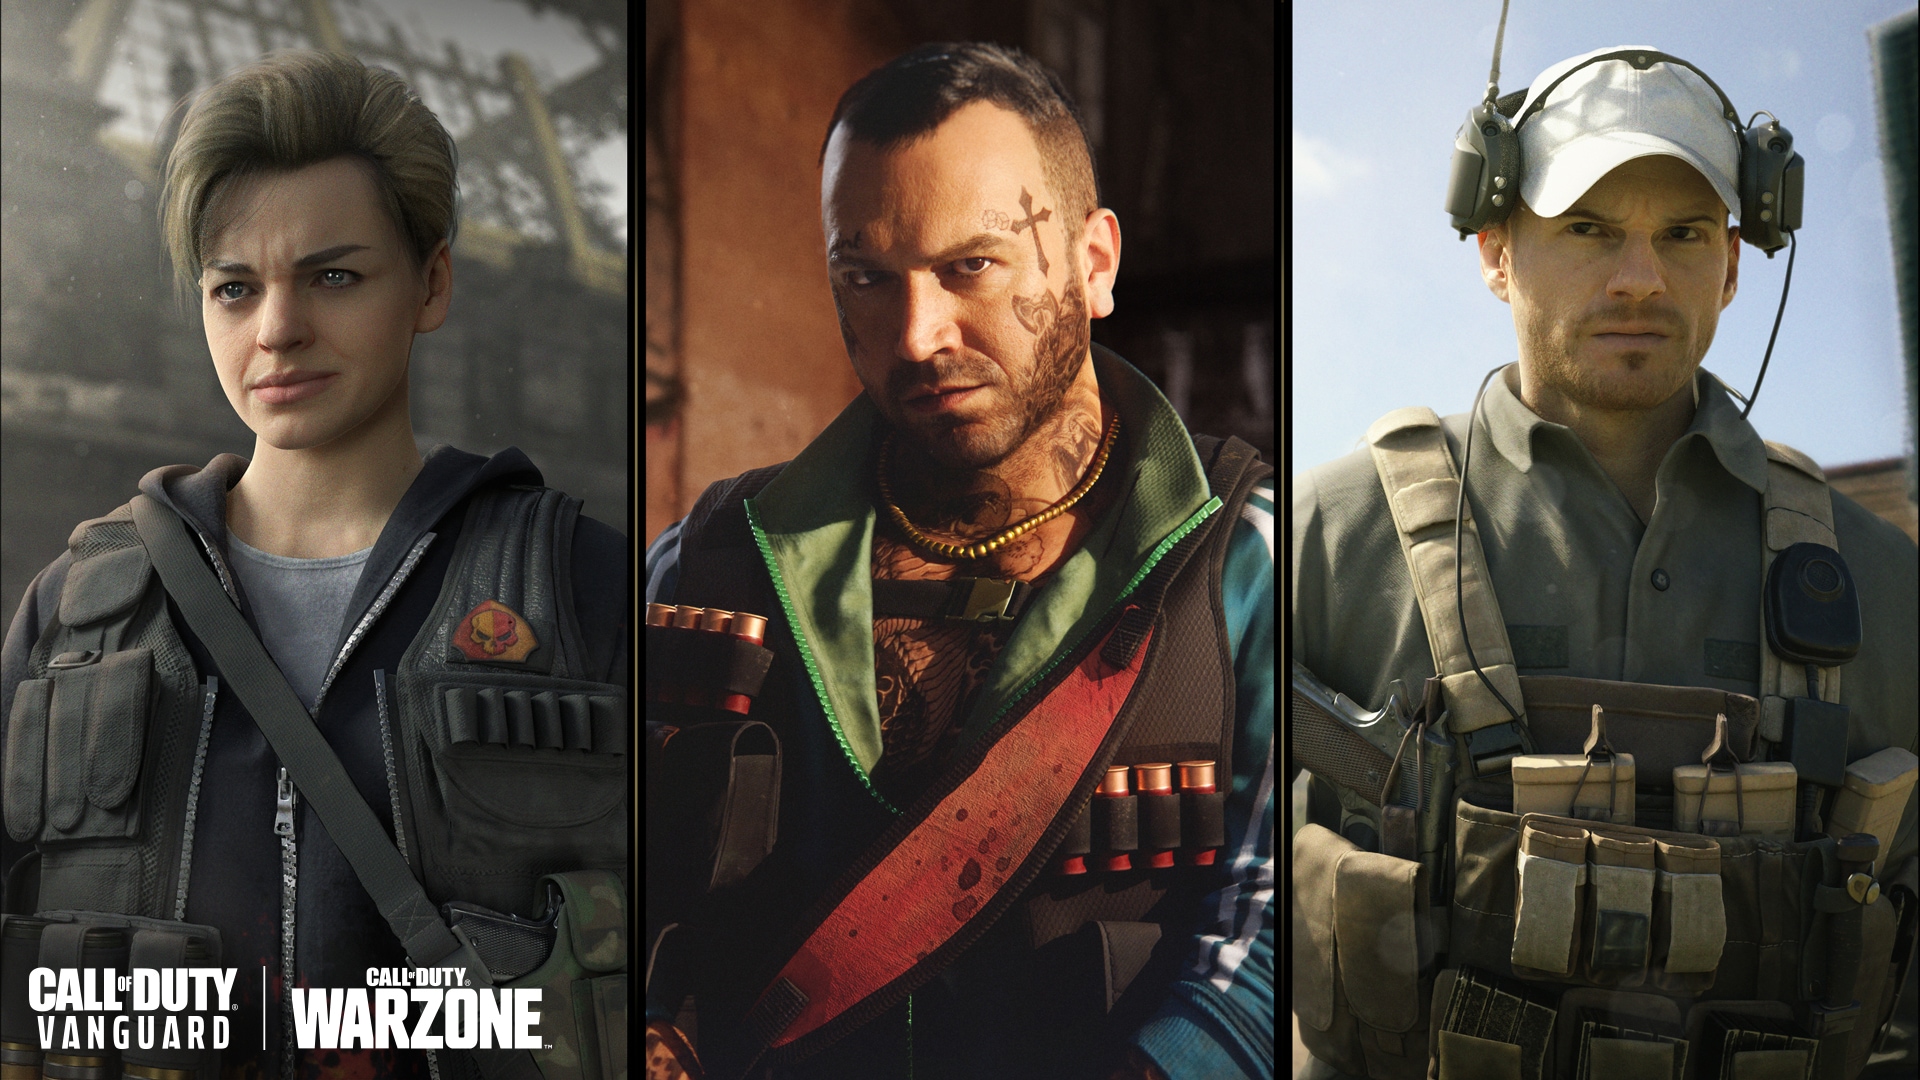 Activision's Game Pass SHOCKER: Why You WON'T Be Playing Call of Duty  Anytime Soon! 